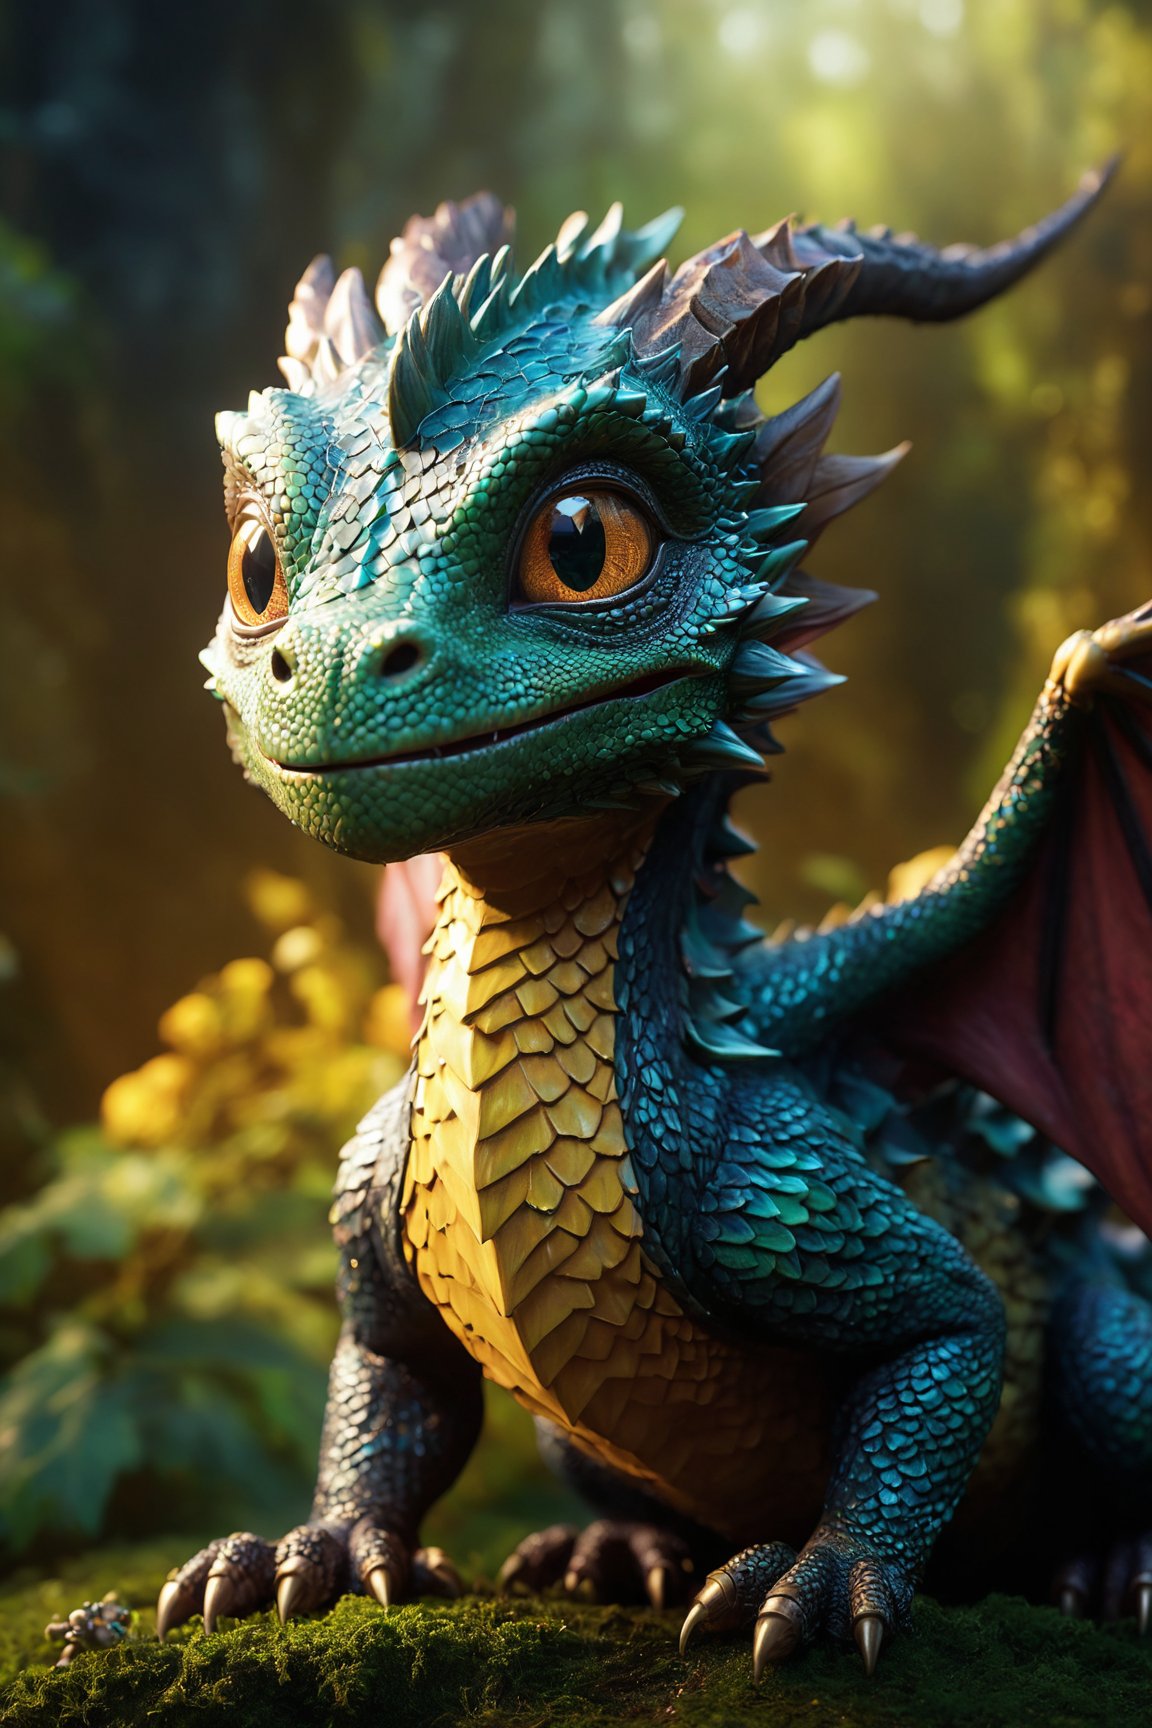 (best quality,16K,UHD,masterpiece), ultra-detailed, (cinematically rendered, visually stunning) artwork featuring a baby dragon. Picture a vibrant and enchanting scene with the dragon set against a mystical background. The 3D rendering brings out intricate details like its textured scales and adorable expression. The fluffy wings add a touch of whimsy, complemented by sparkling eyes that radiate playfulness. The magical atmosphere is intensified by realistic textures, professional artistry, and a captivating composition. Immerse yourself in an epic fantasy scene with a perfect blend of fantasy art style and mystical lighting.